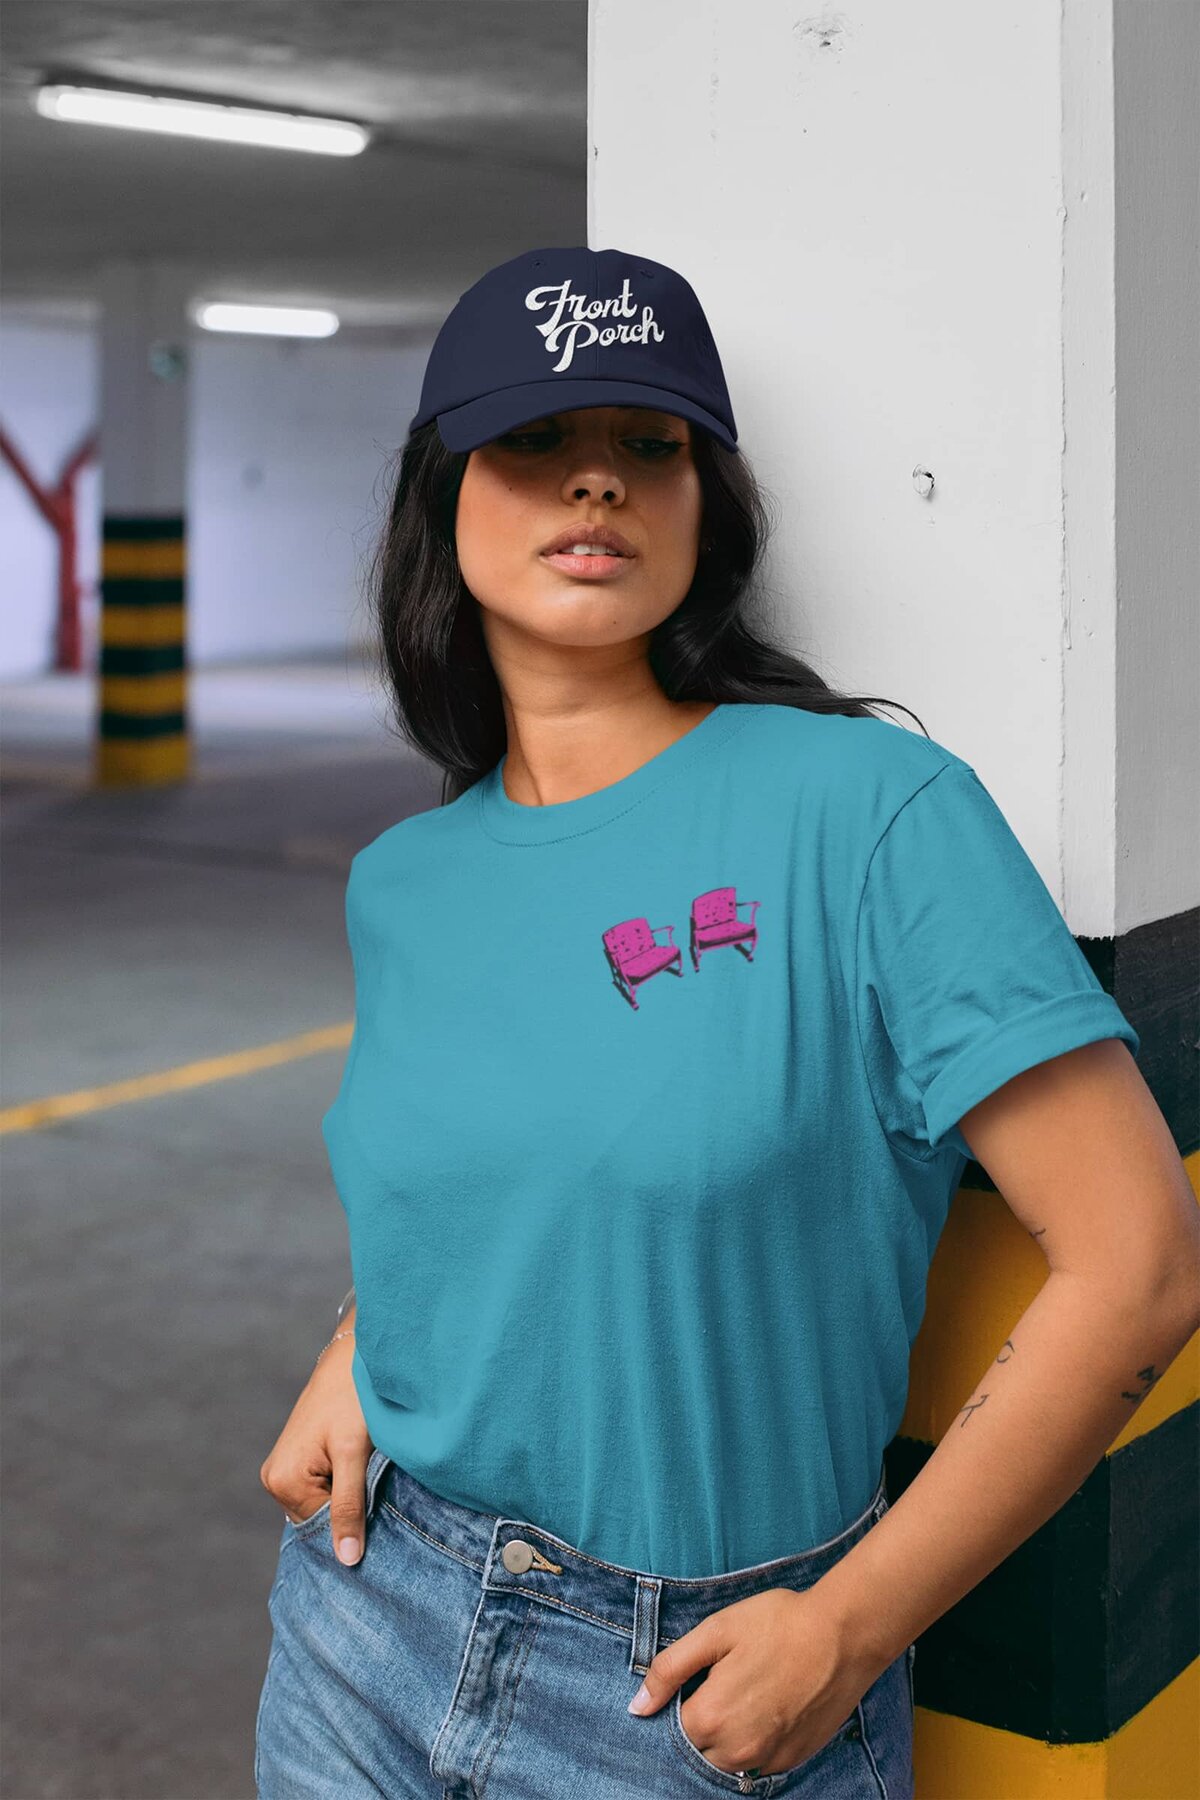 A woman standing in a parking garage wearing a navy baseball cap with "Front Porch" embroidered on the front, and a teal t-shirt with a pair of pink chairs on the left chest